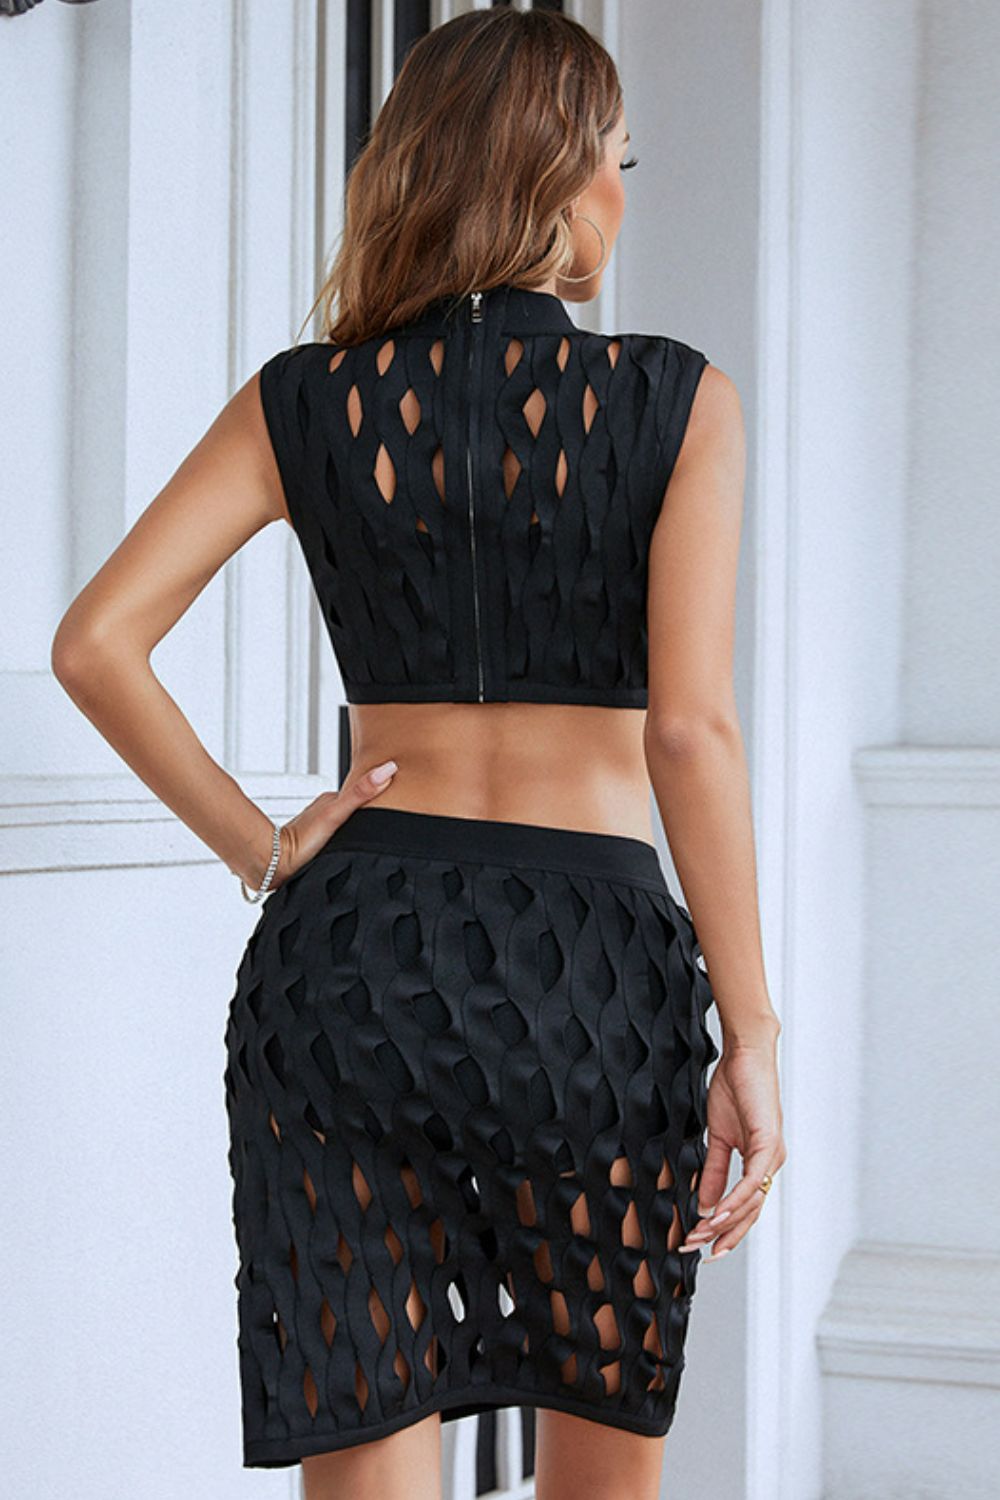 Top and Skirt Set Women's Fashion sexy lace Openwork Two Piece Fashion Outfit Set KESLEY